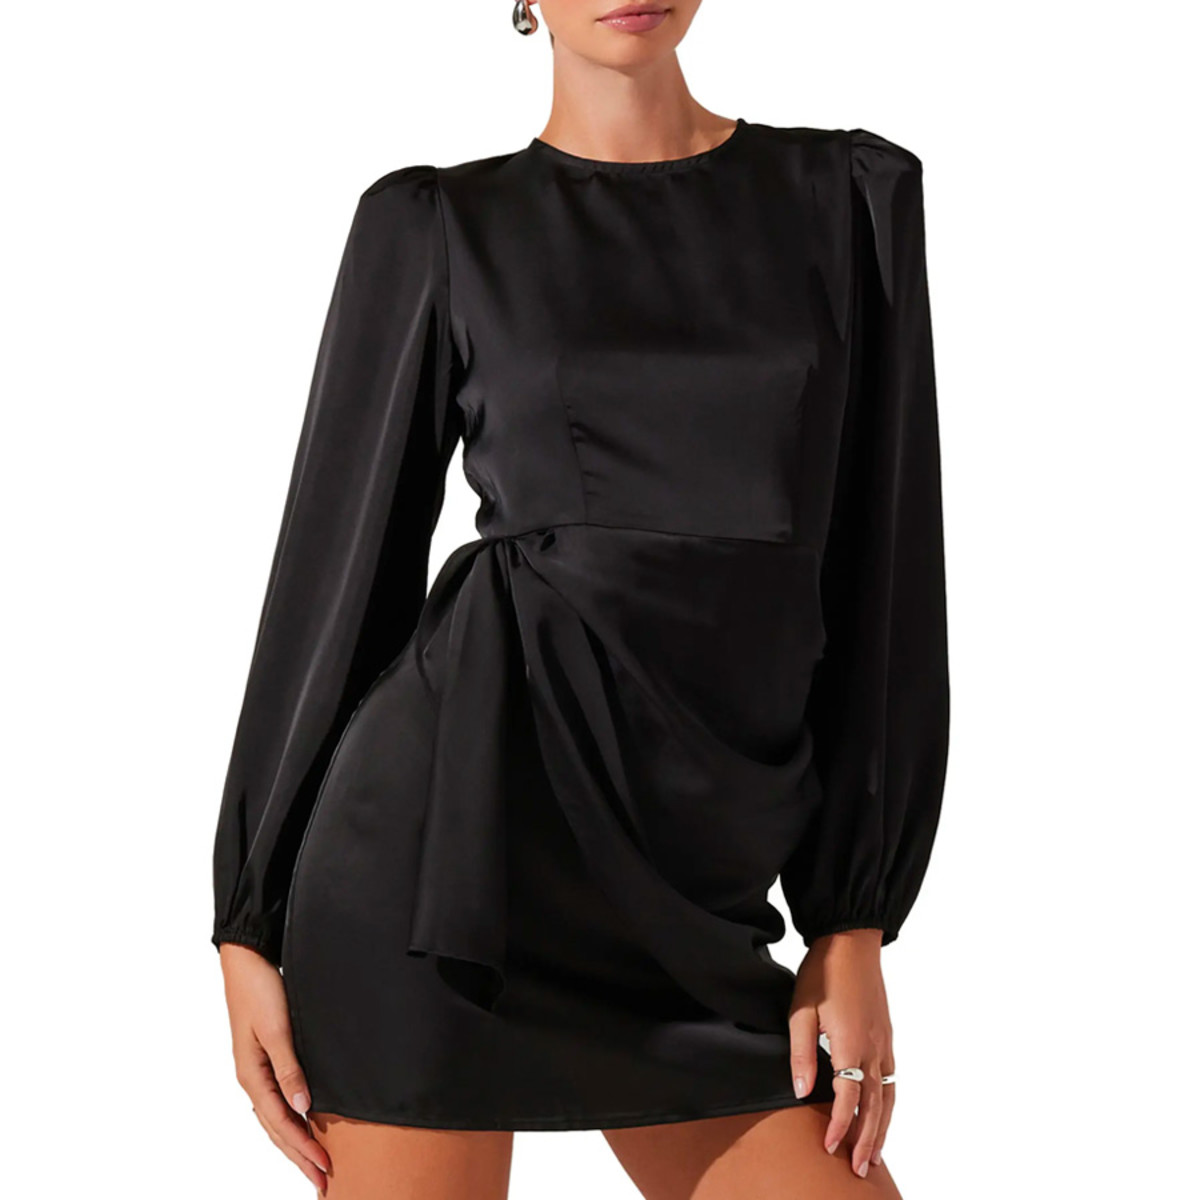 One of Alix Earle's 'When-in-Doubt' Date-Night Outfits, the Best Special Occasion Little Black Dress, the ASTR the Label Long Sleeve Draped Satin Minidress available at Nordstrom